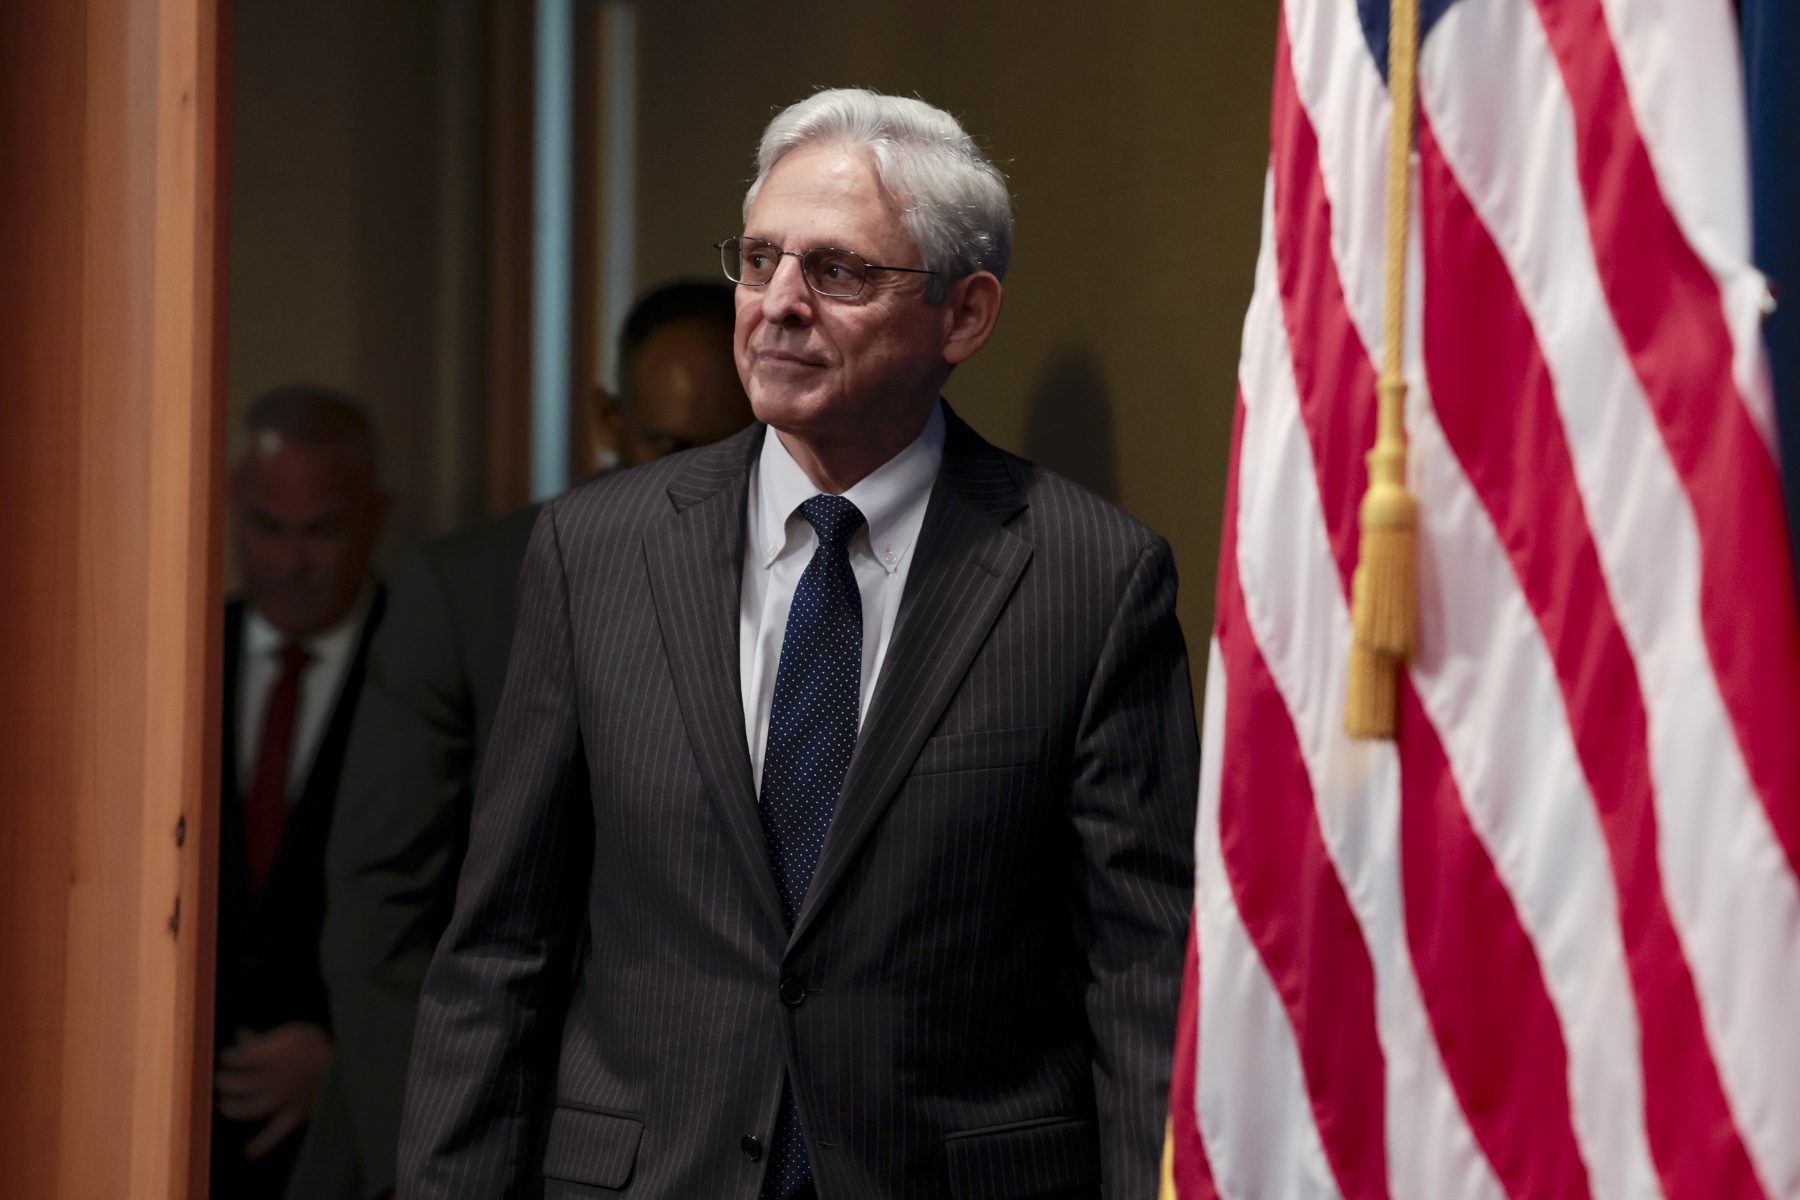 U.S. Attorney General Merrick Garland arrives at a press conference in Washington, D.C.